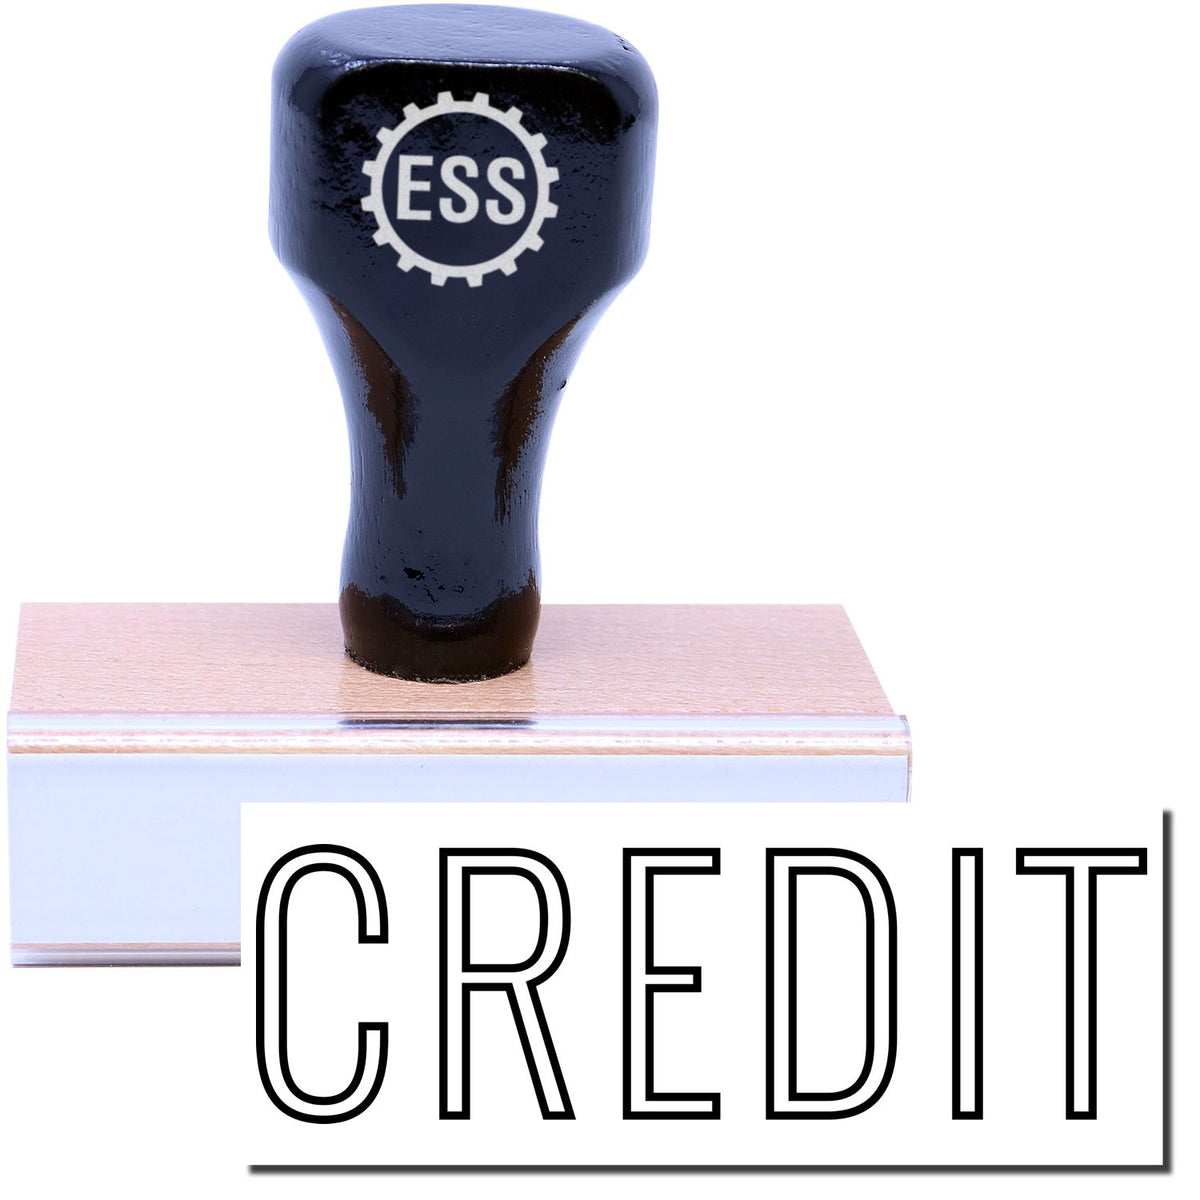 A stock office rubber stamp with a stamped image showing how the text &quot;CREDIT&quot; in a large outline font is displayed after stamping.